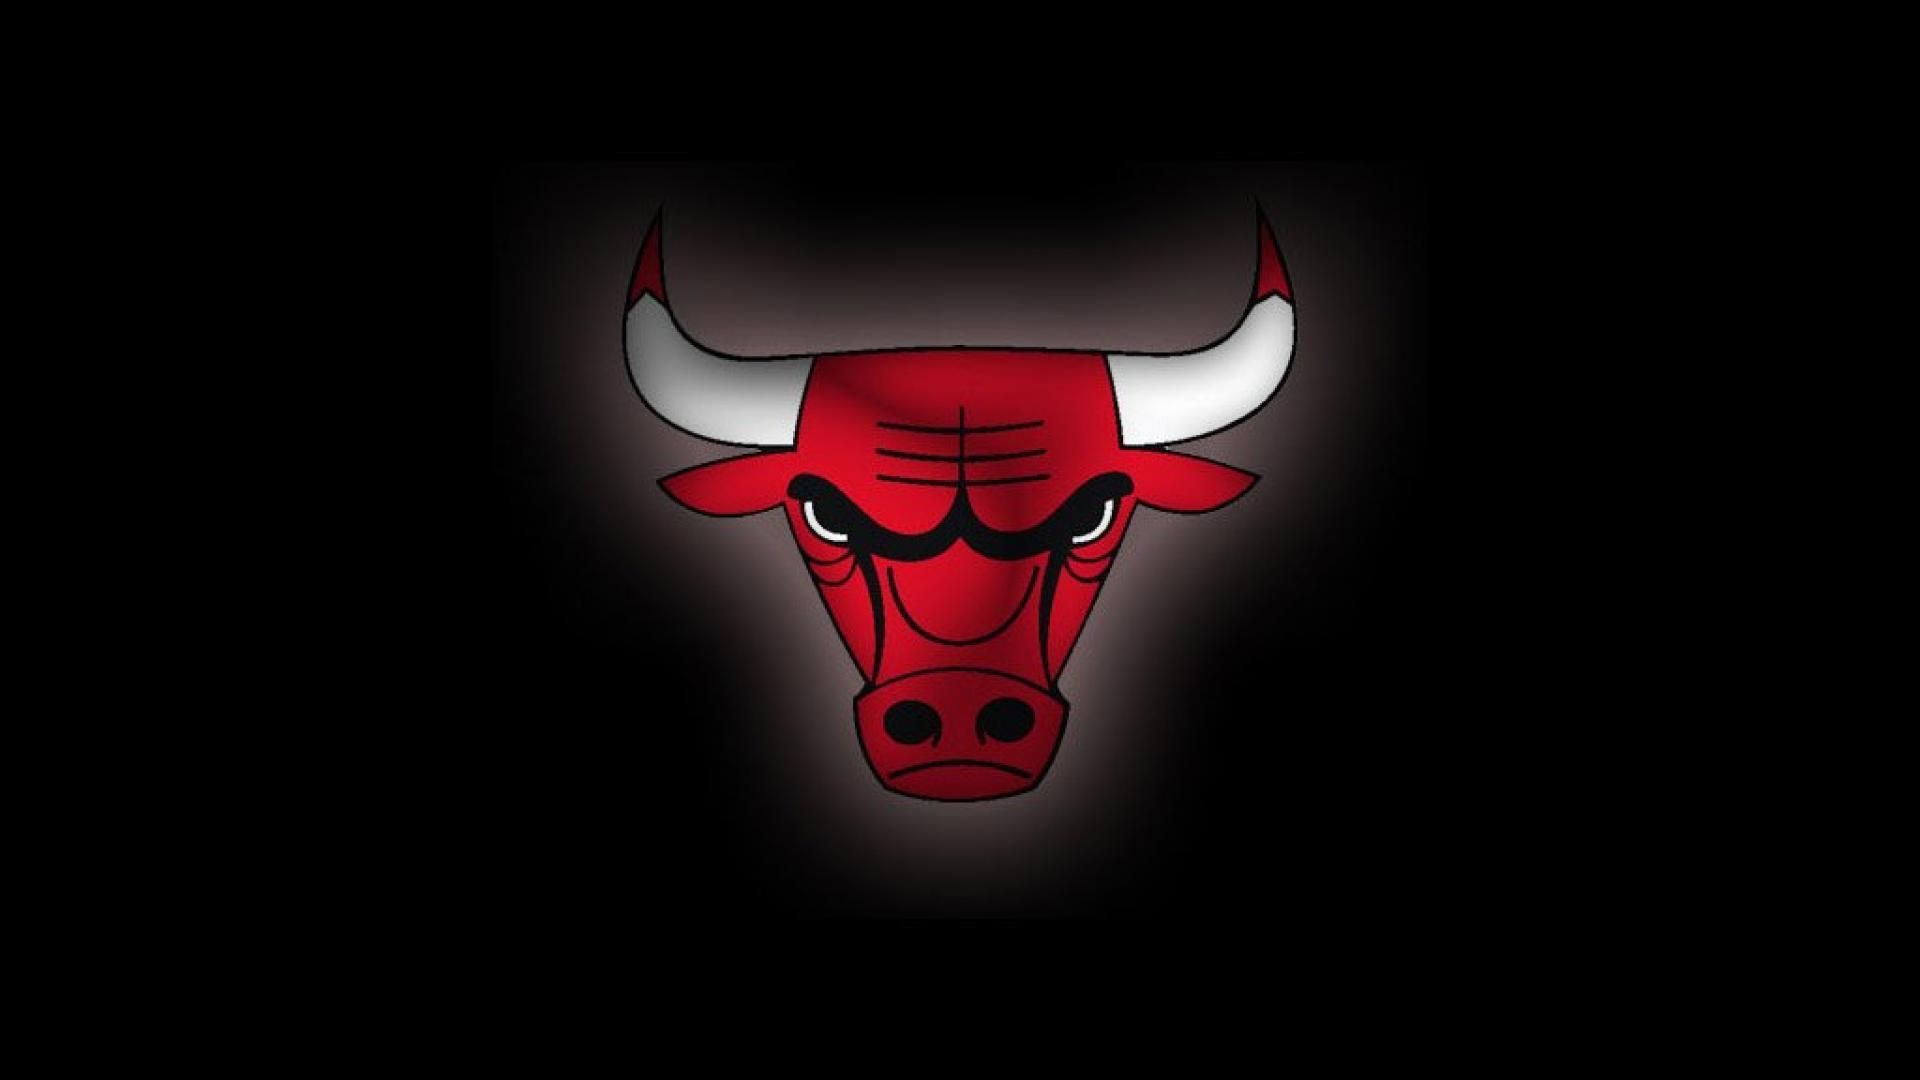 Chicago bulls basketball wallpapers - (#41524) - High Quality and ...